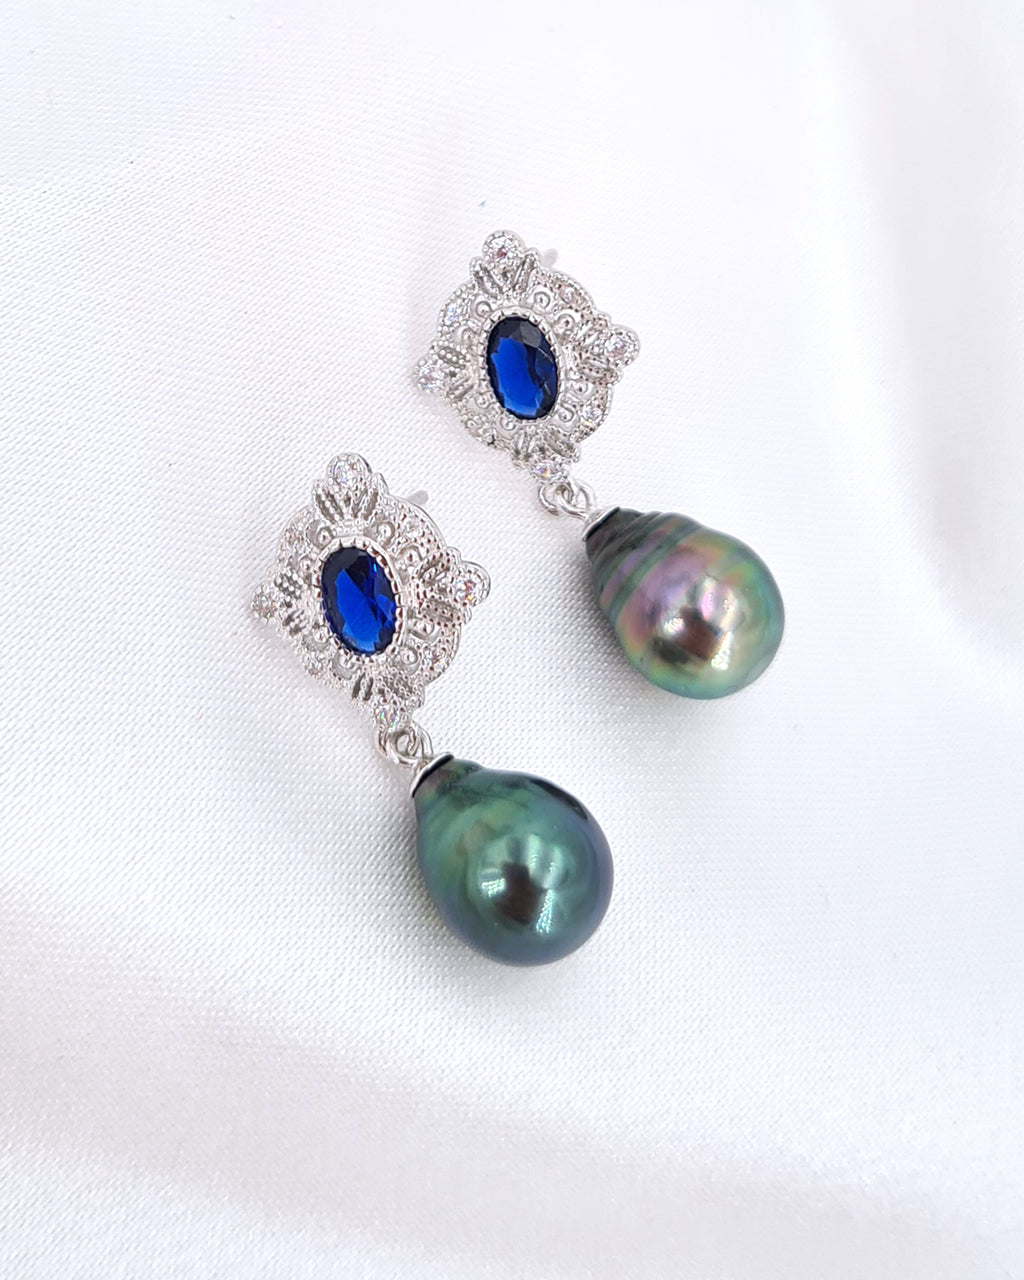 Tahitian Pearl Earrings - Vintage Style Ear-posts with Navy Blue Cubic Zirconia | Handmade Pearl Jewelry from Singapore